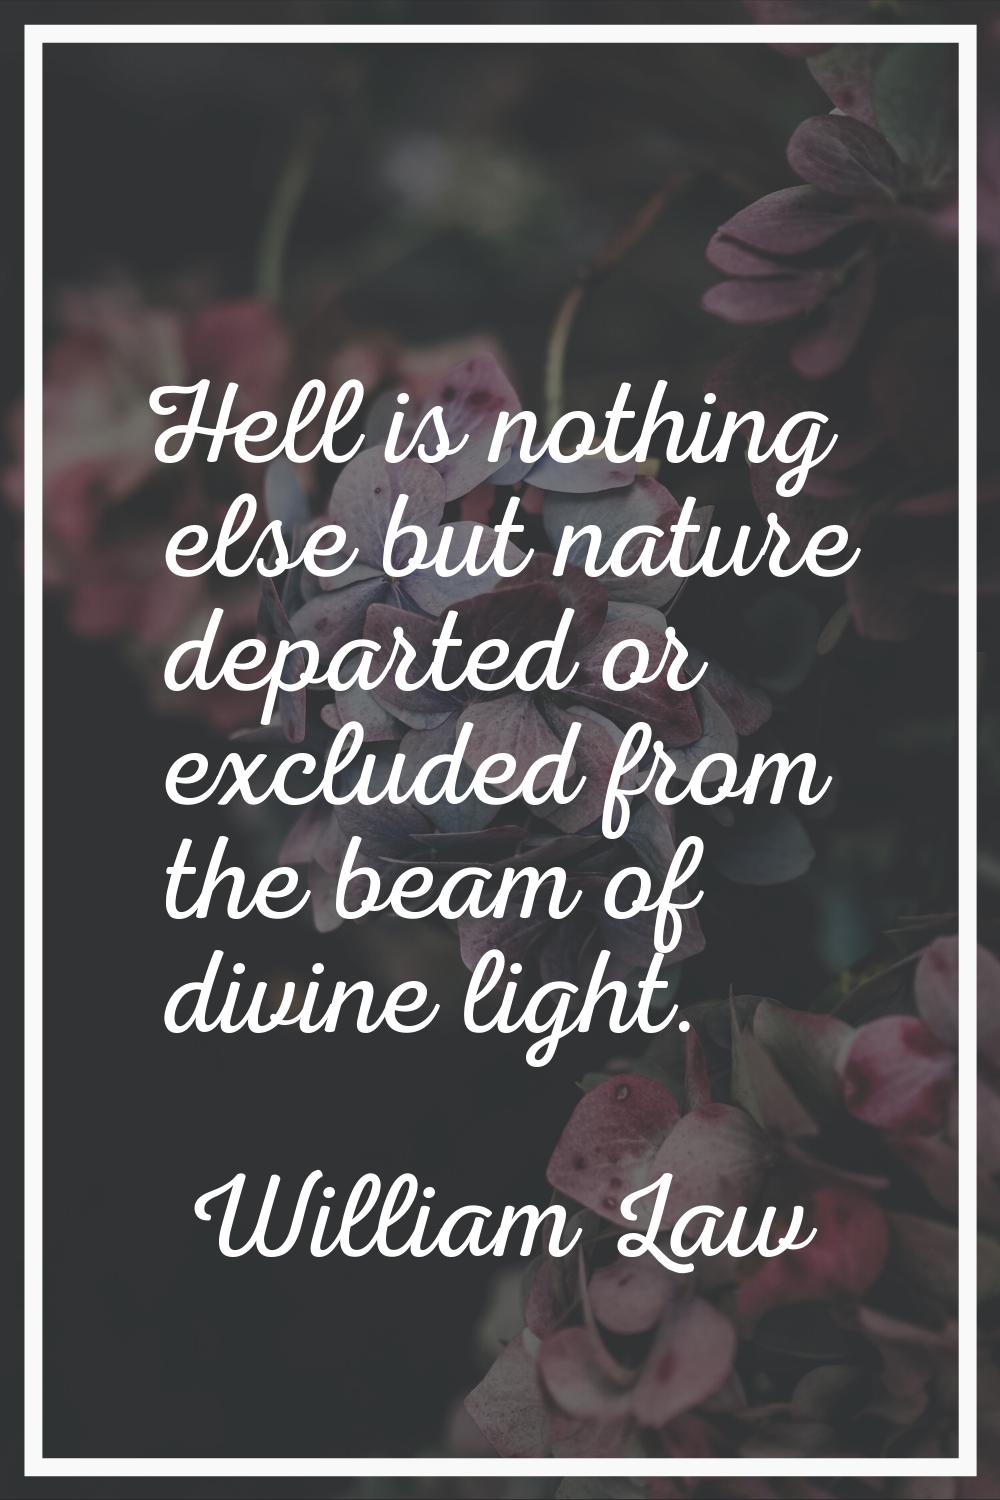 Hell is nothing else but nature departed or excluded from the beam of divine light.